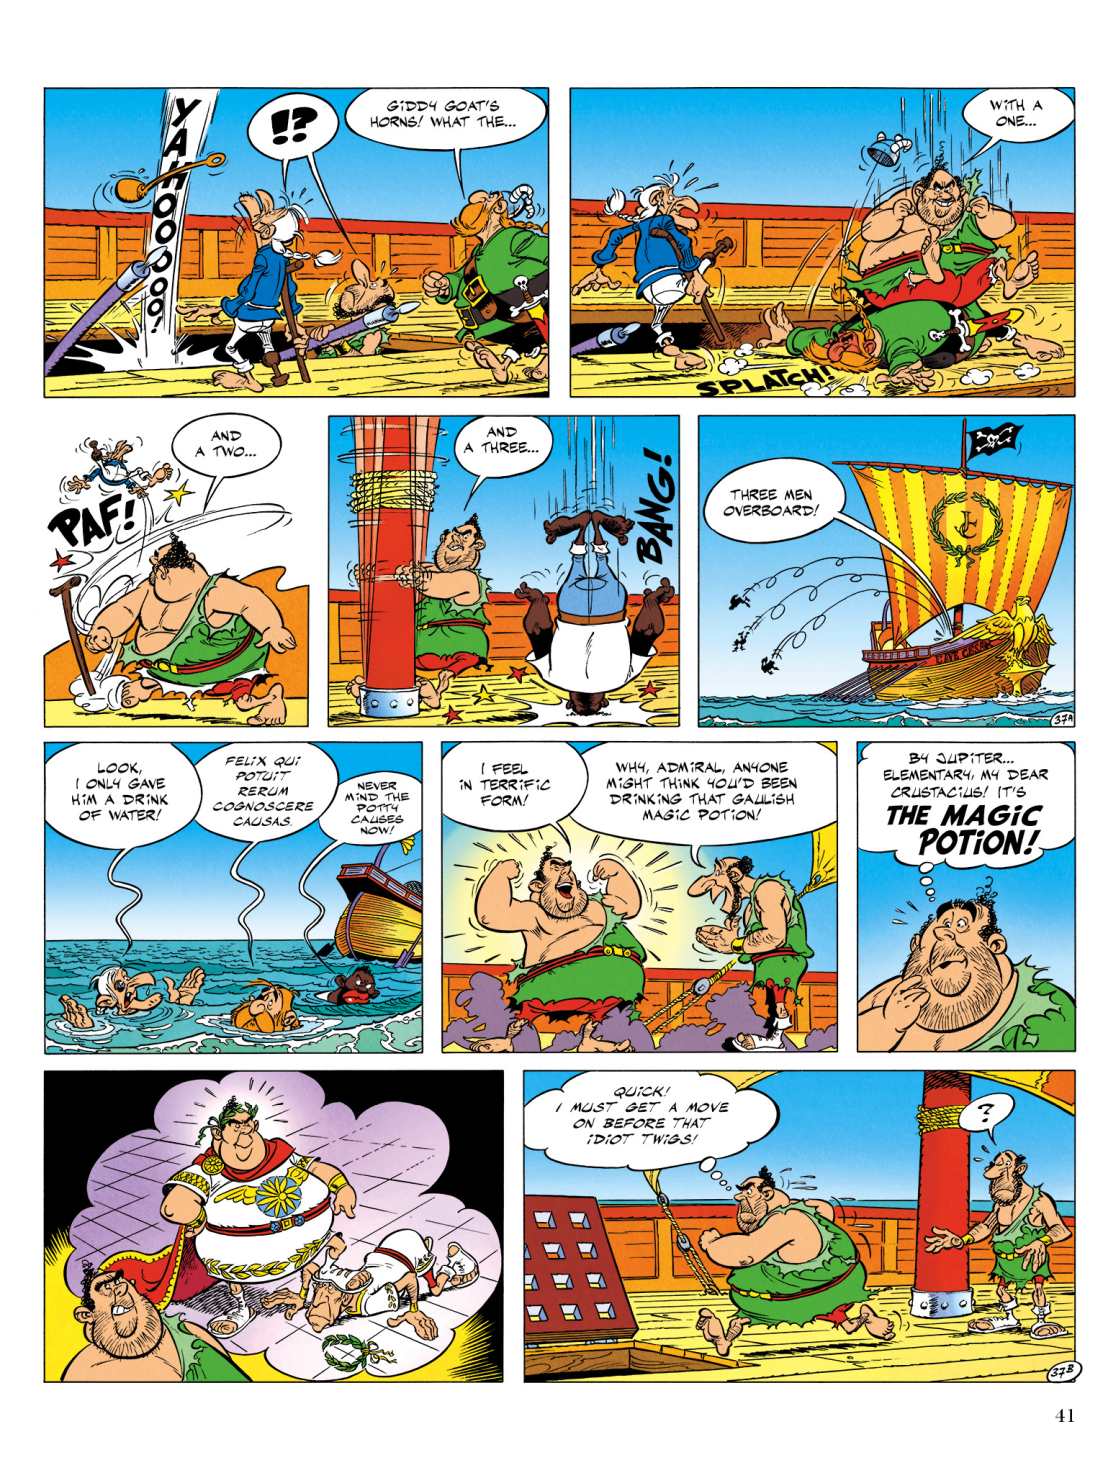 Read Comics Online Free - Asterix Comic Book Issue - Page 42